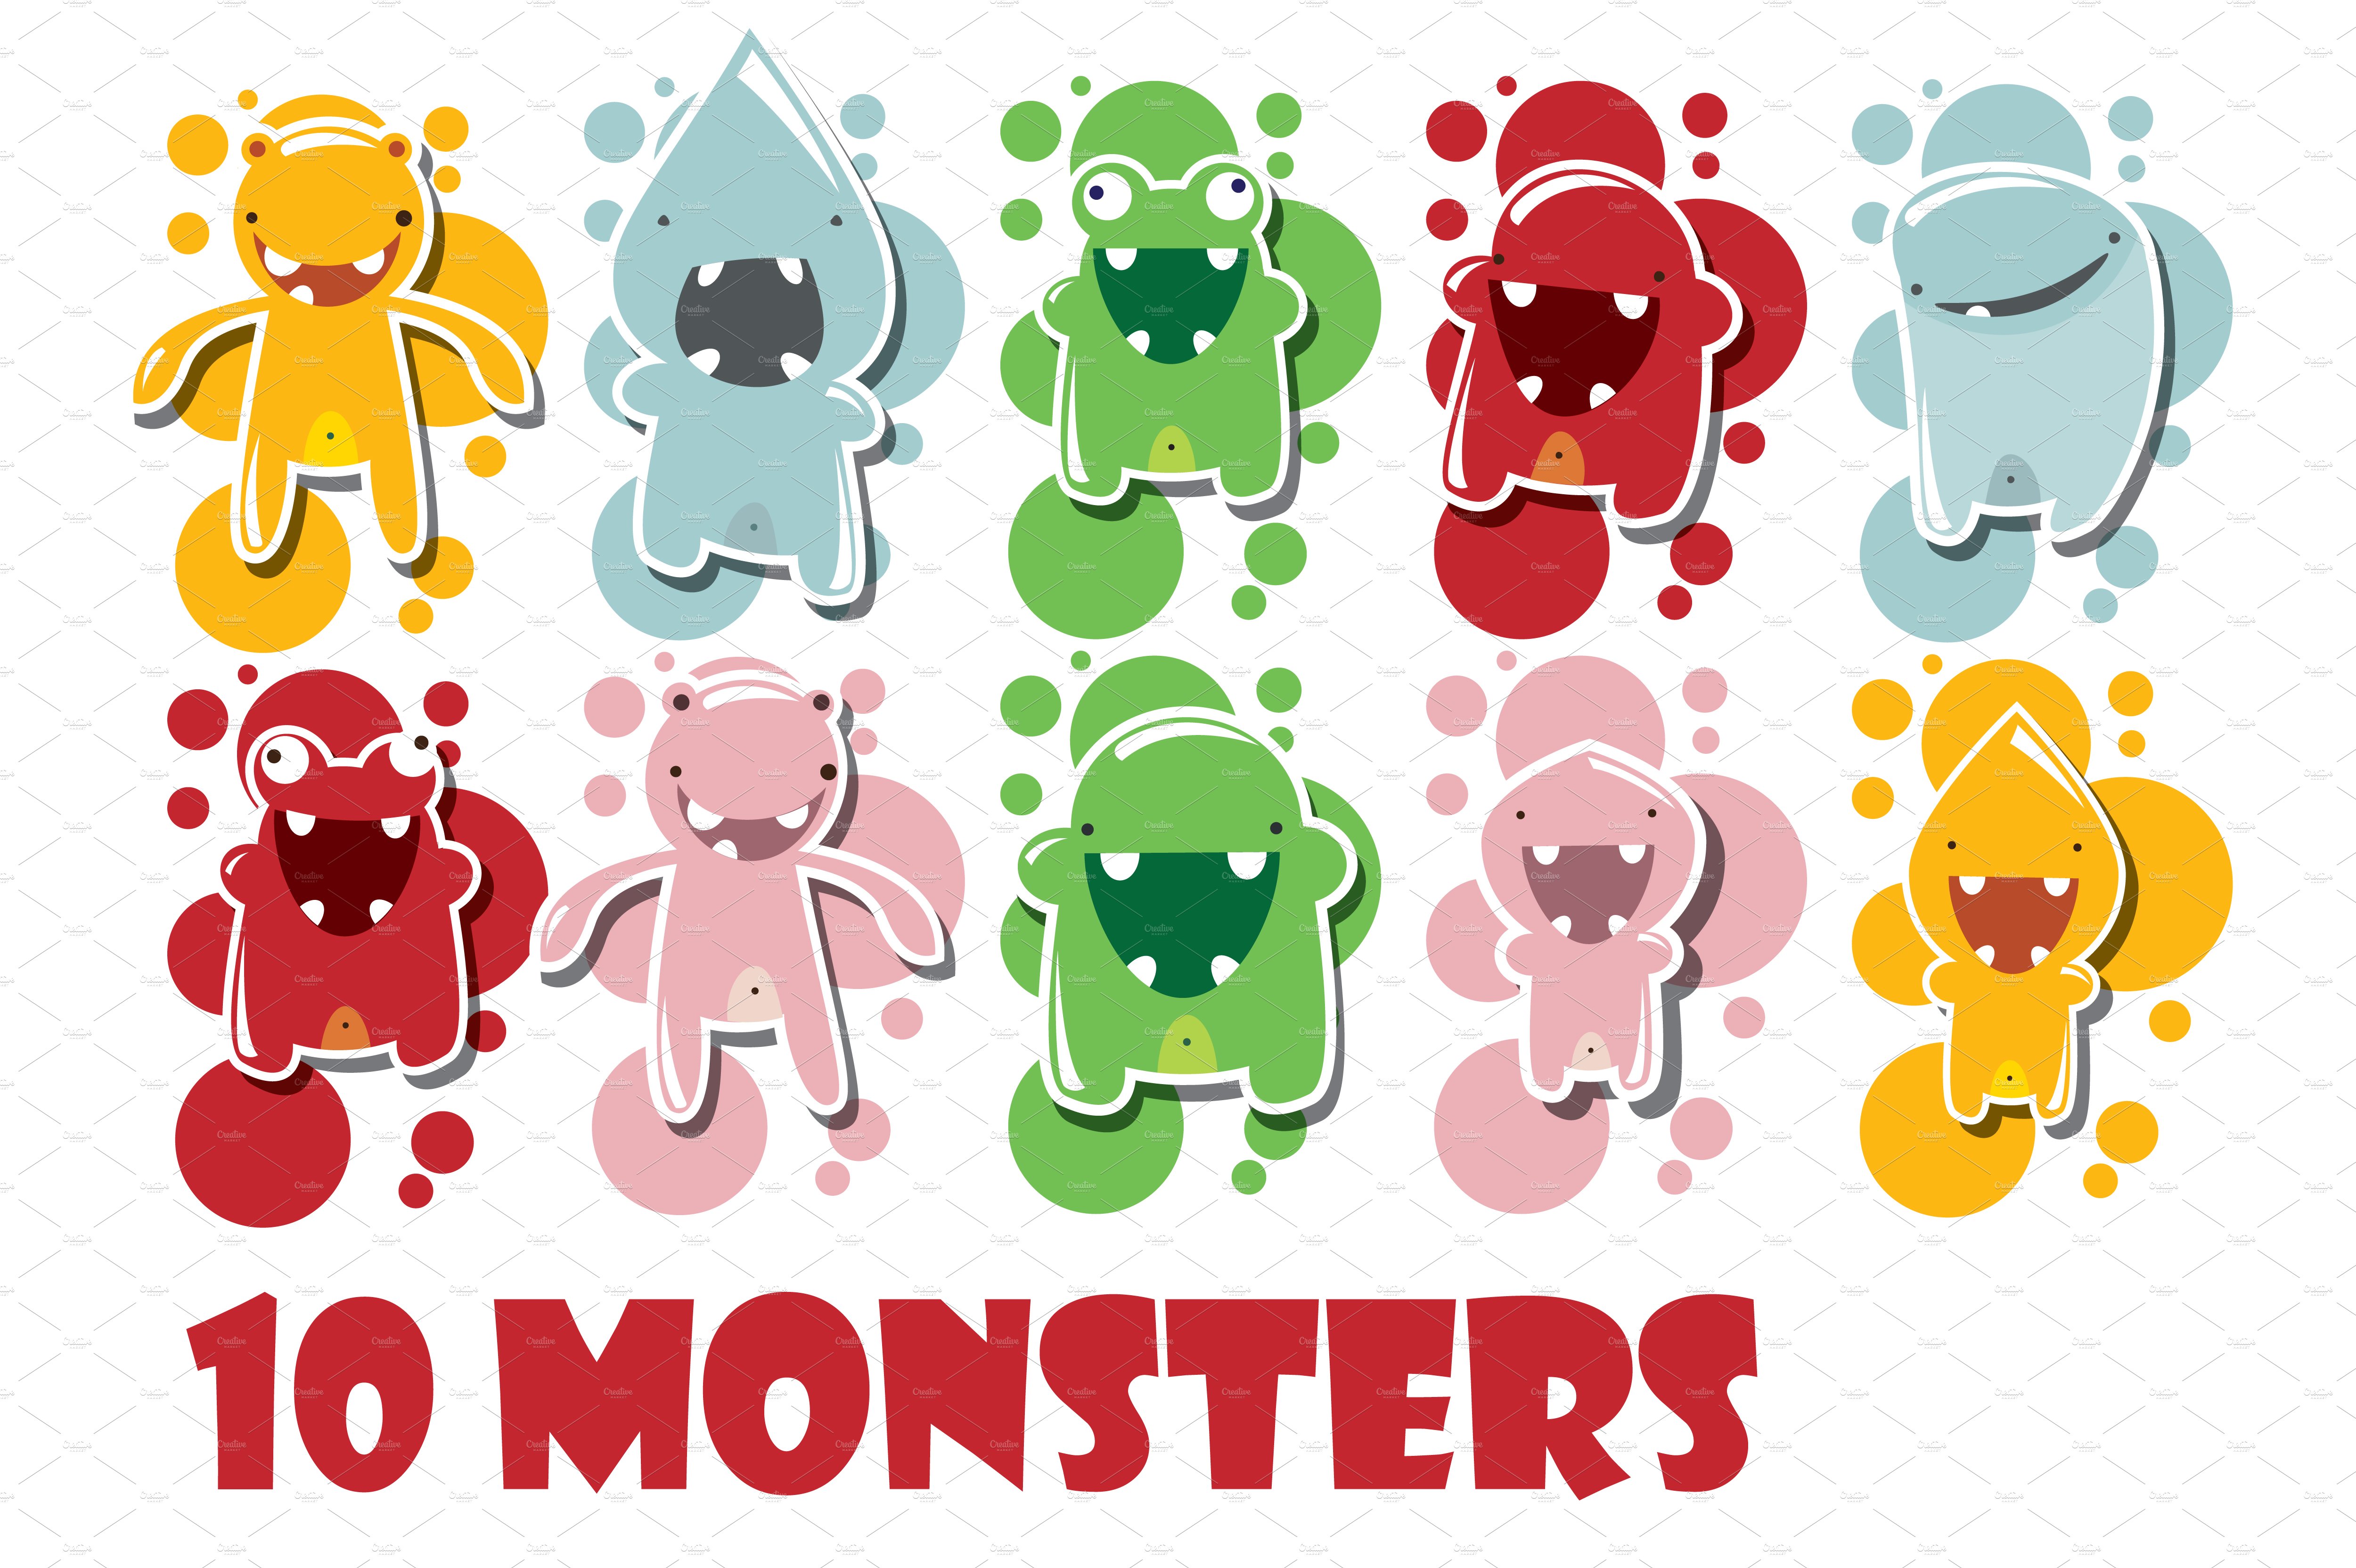 10 Monsters cover image.